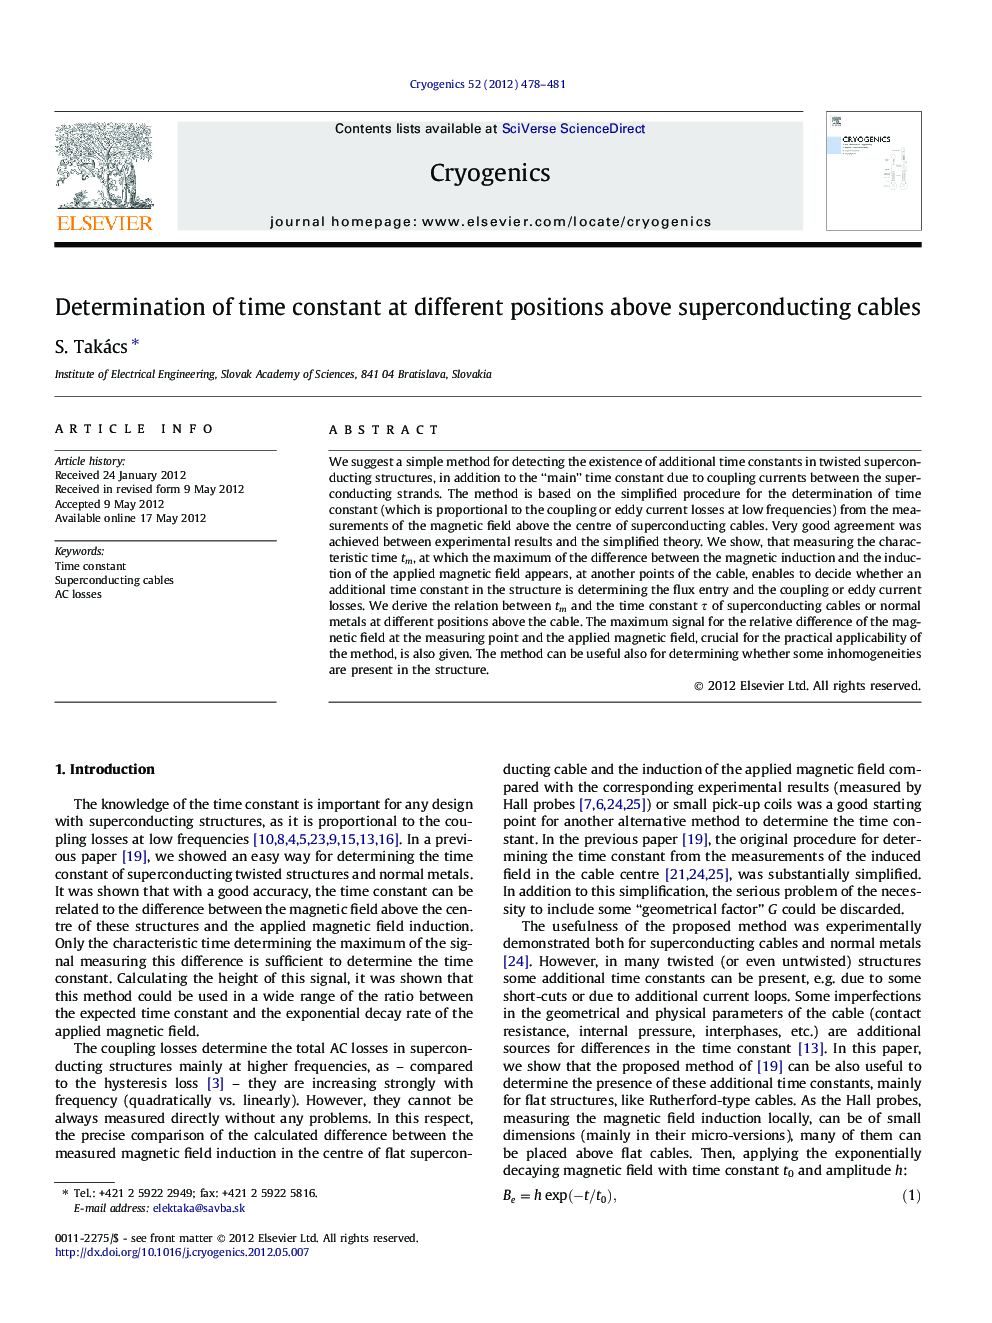 Determination of time constant at different positions above superconducting cables